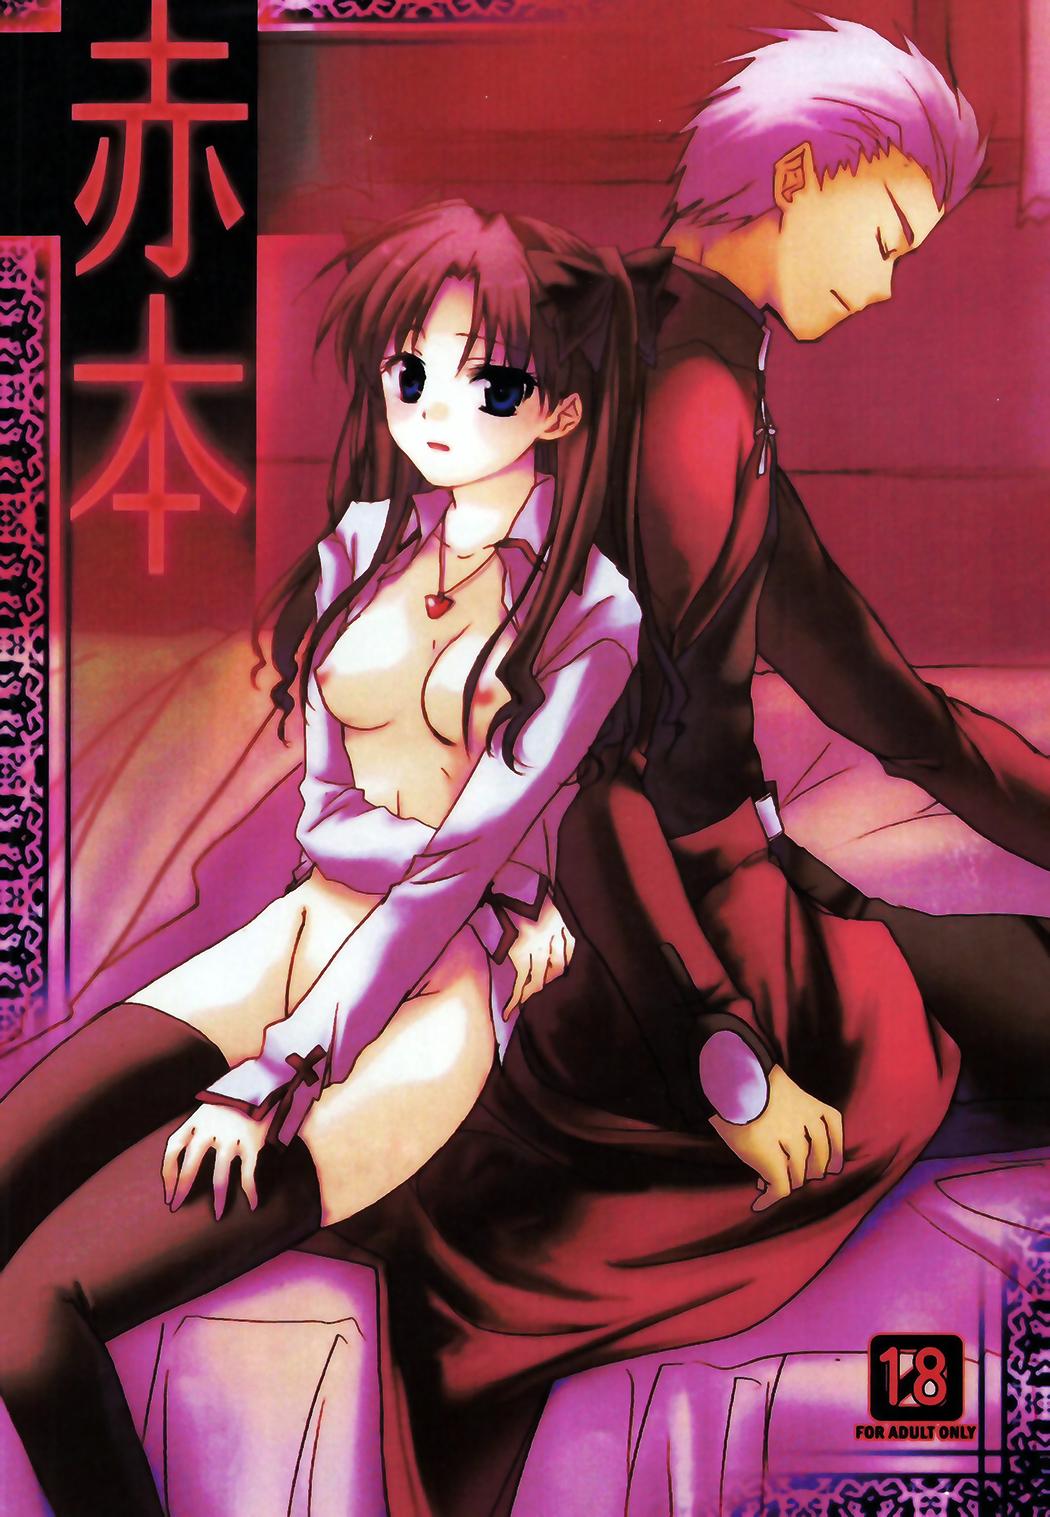 Les Akahon - Fate stay night Pussysex - Picture 1